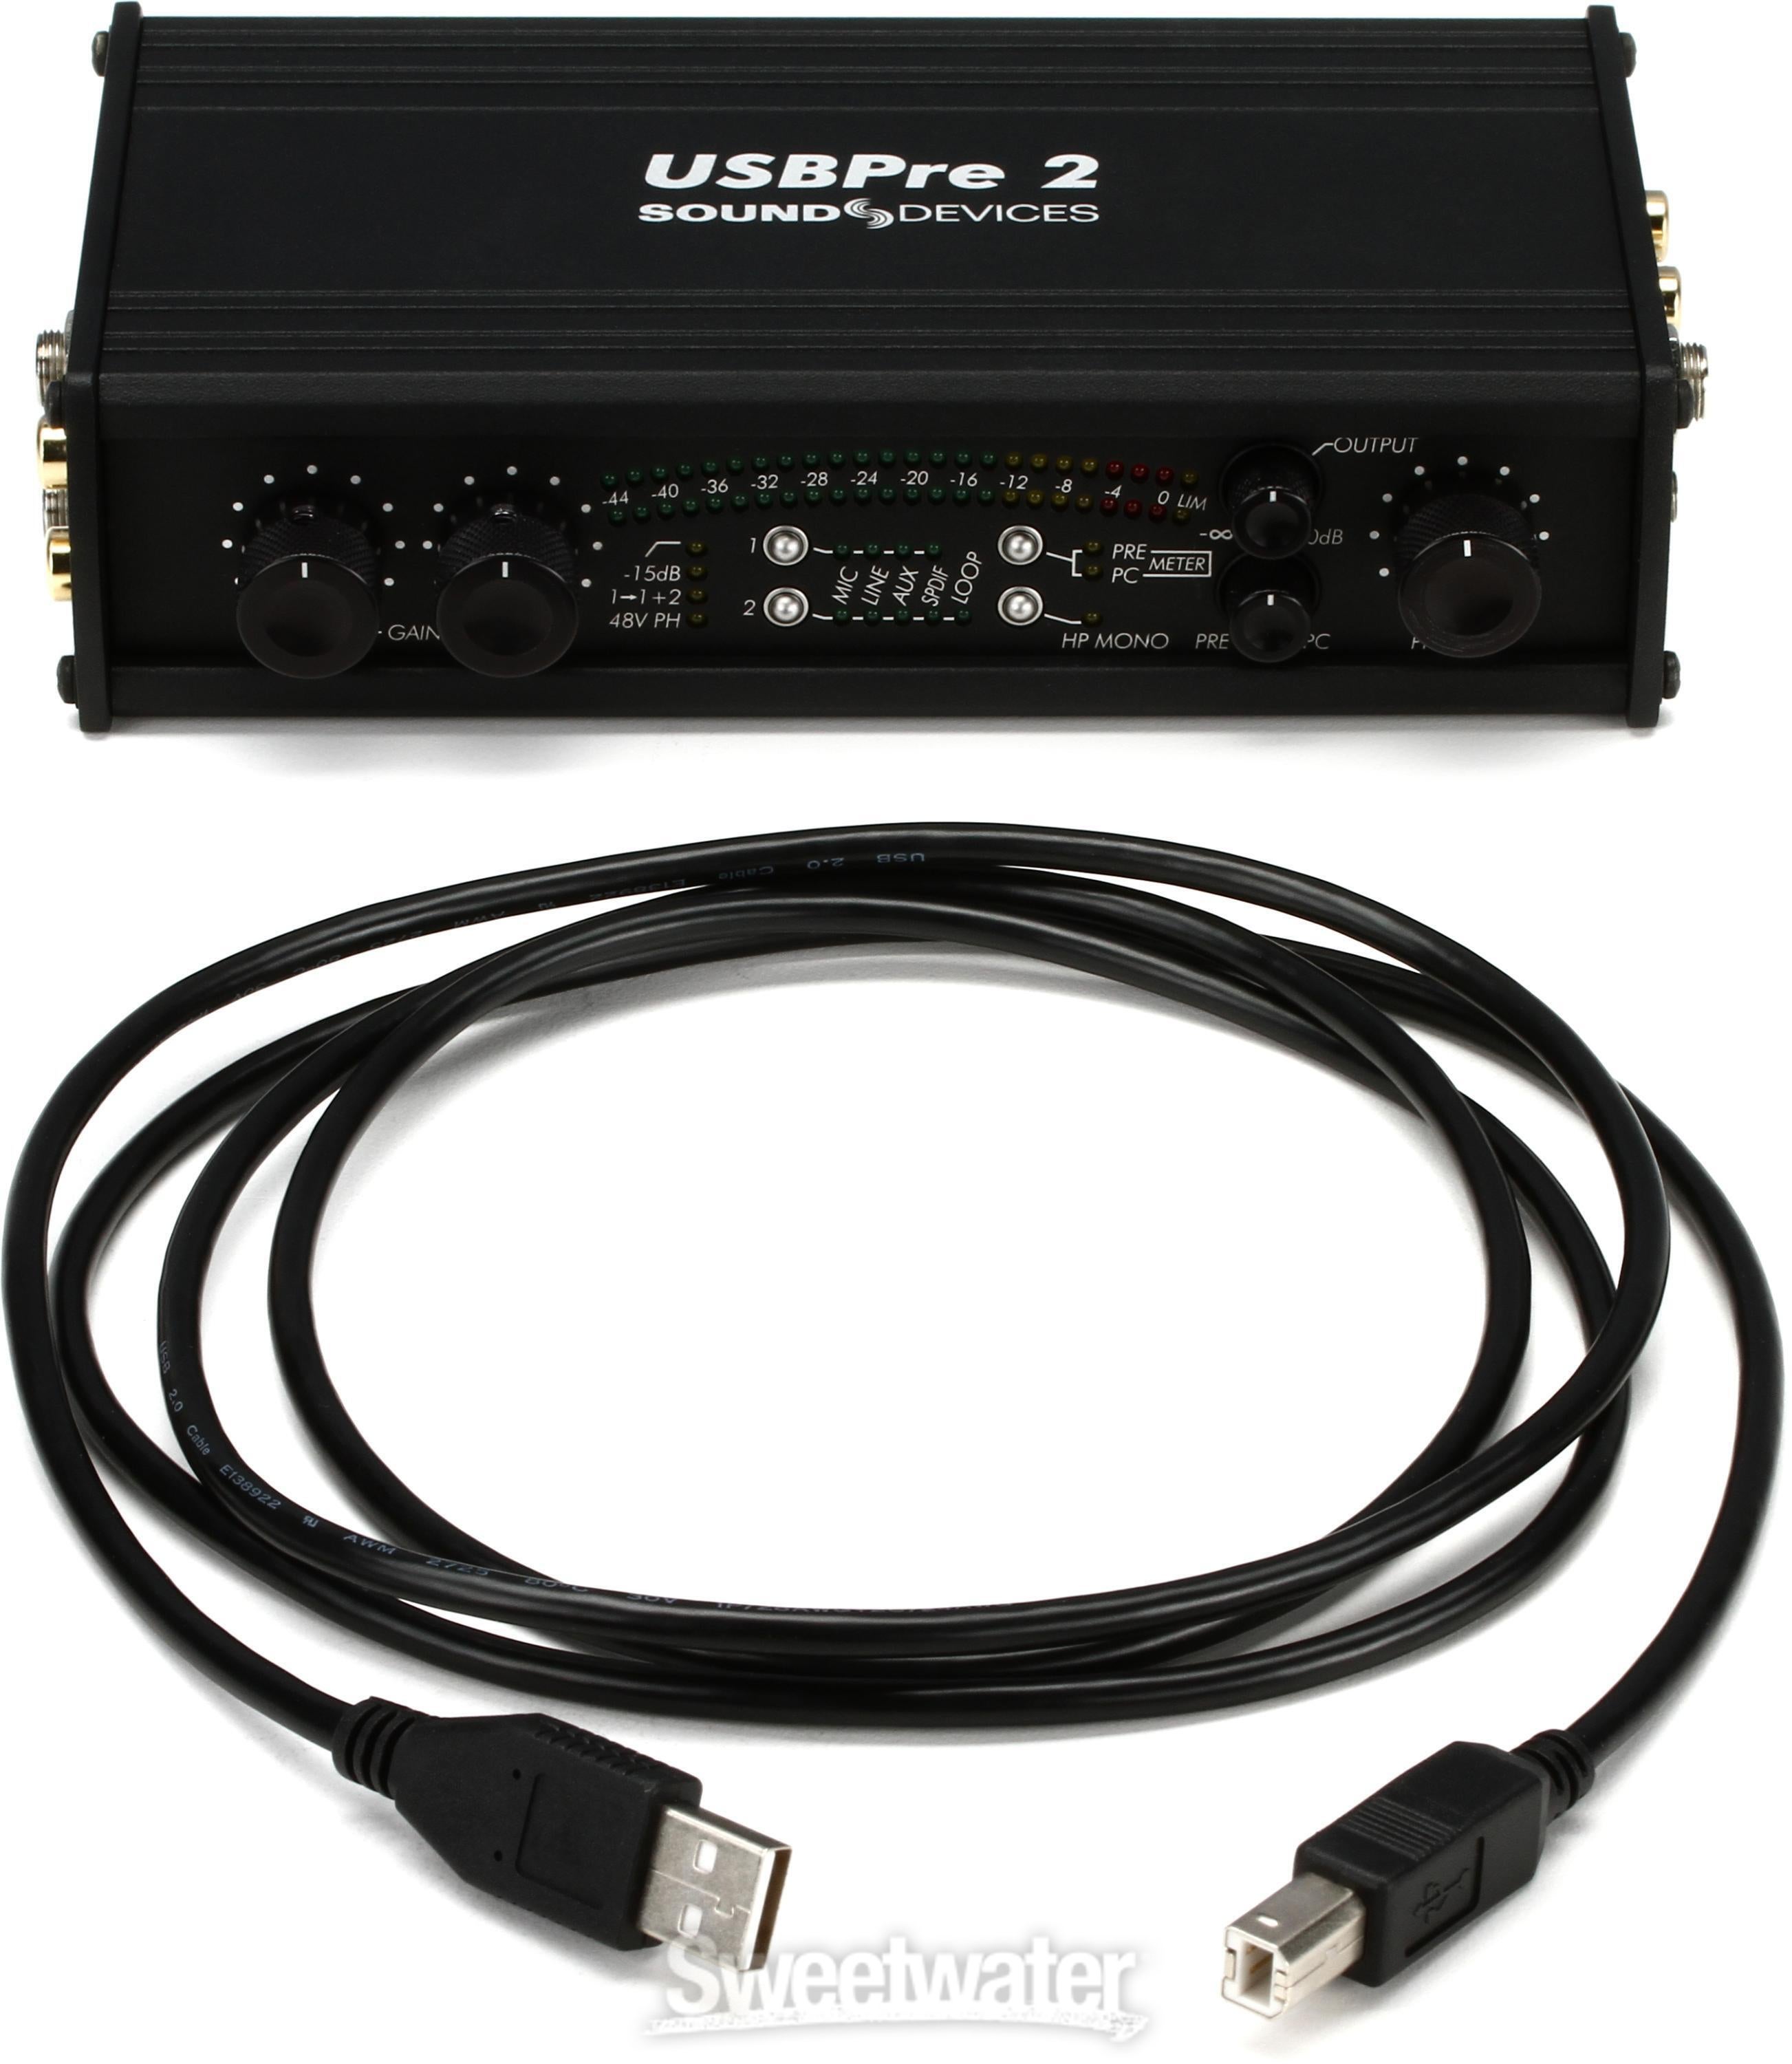 Sound Devices USBPre 2 USB Audio Interface | Sweetwater